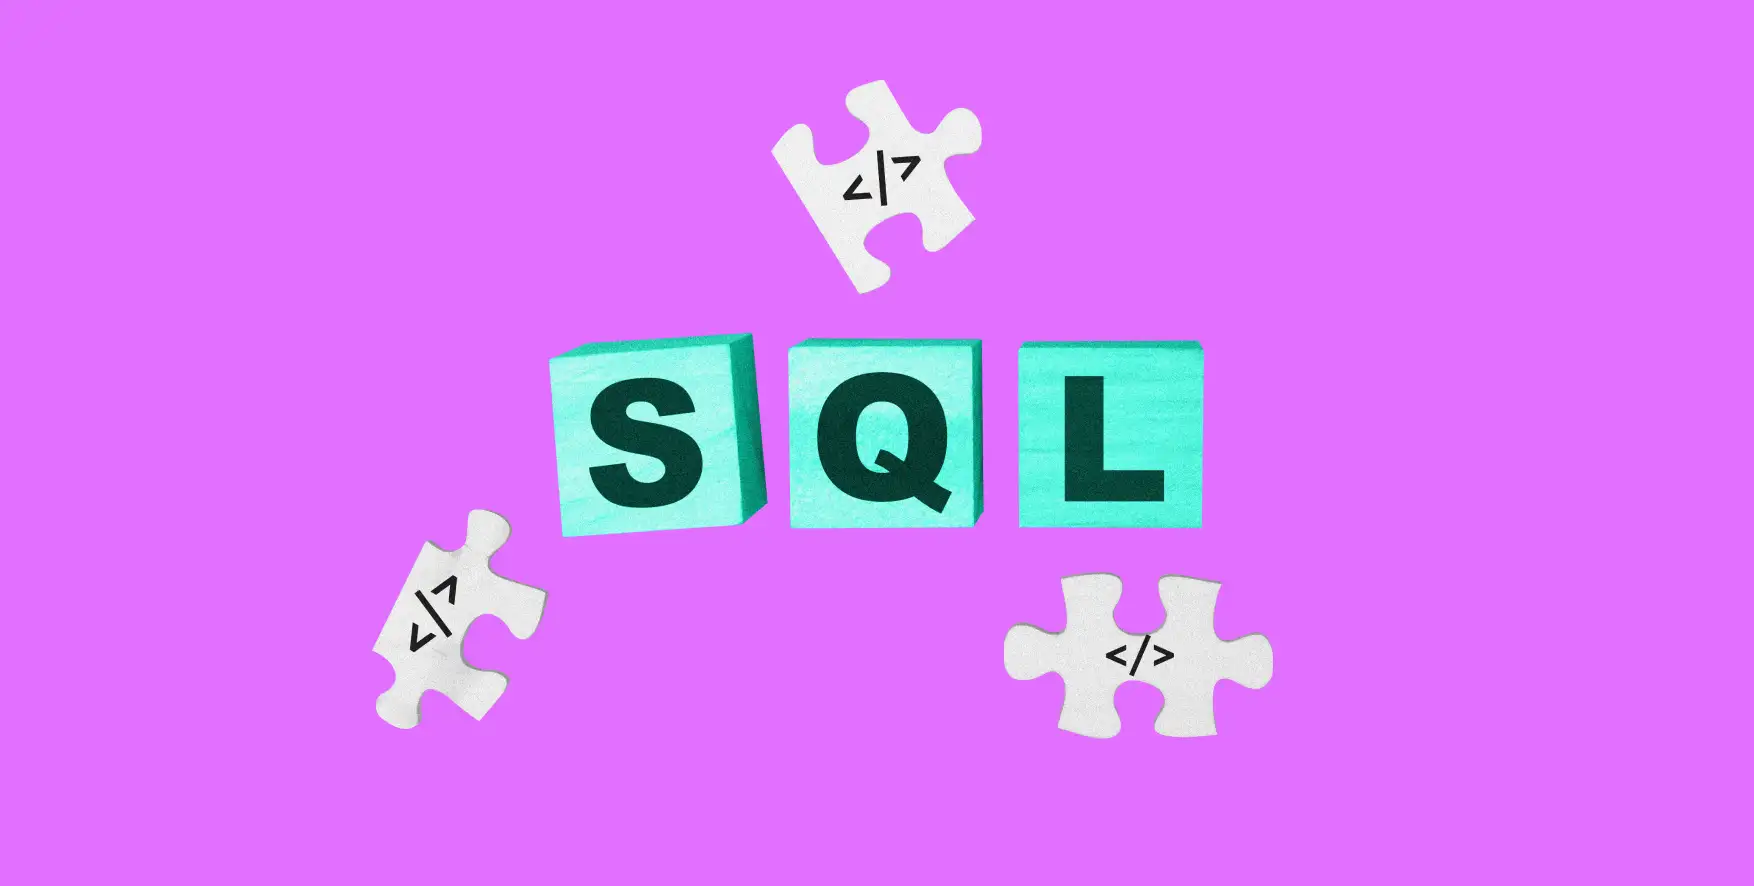 cubes with letters SQL